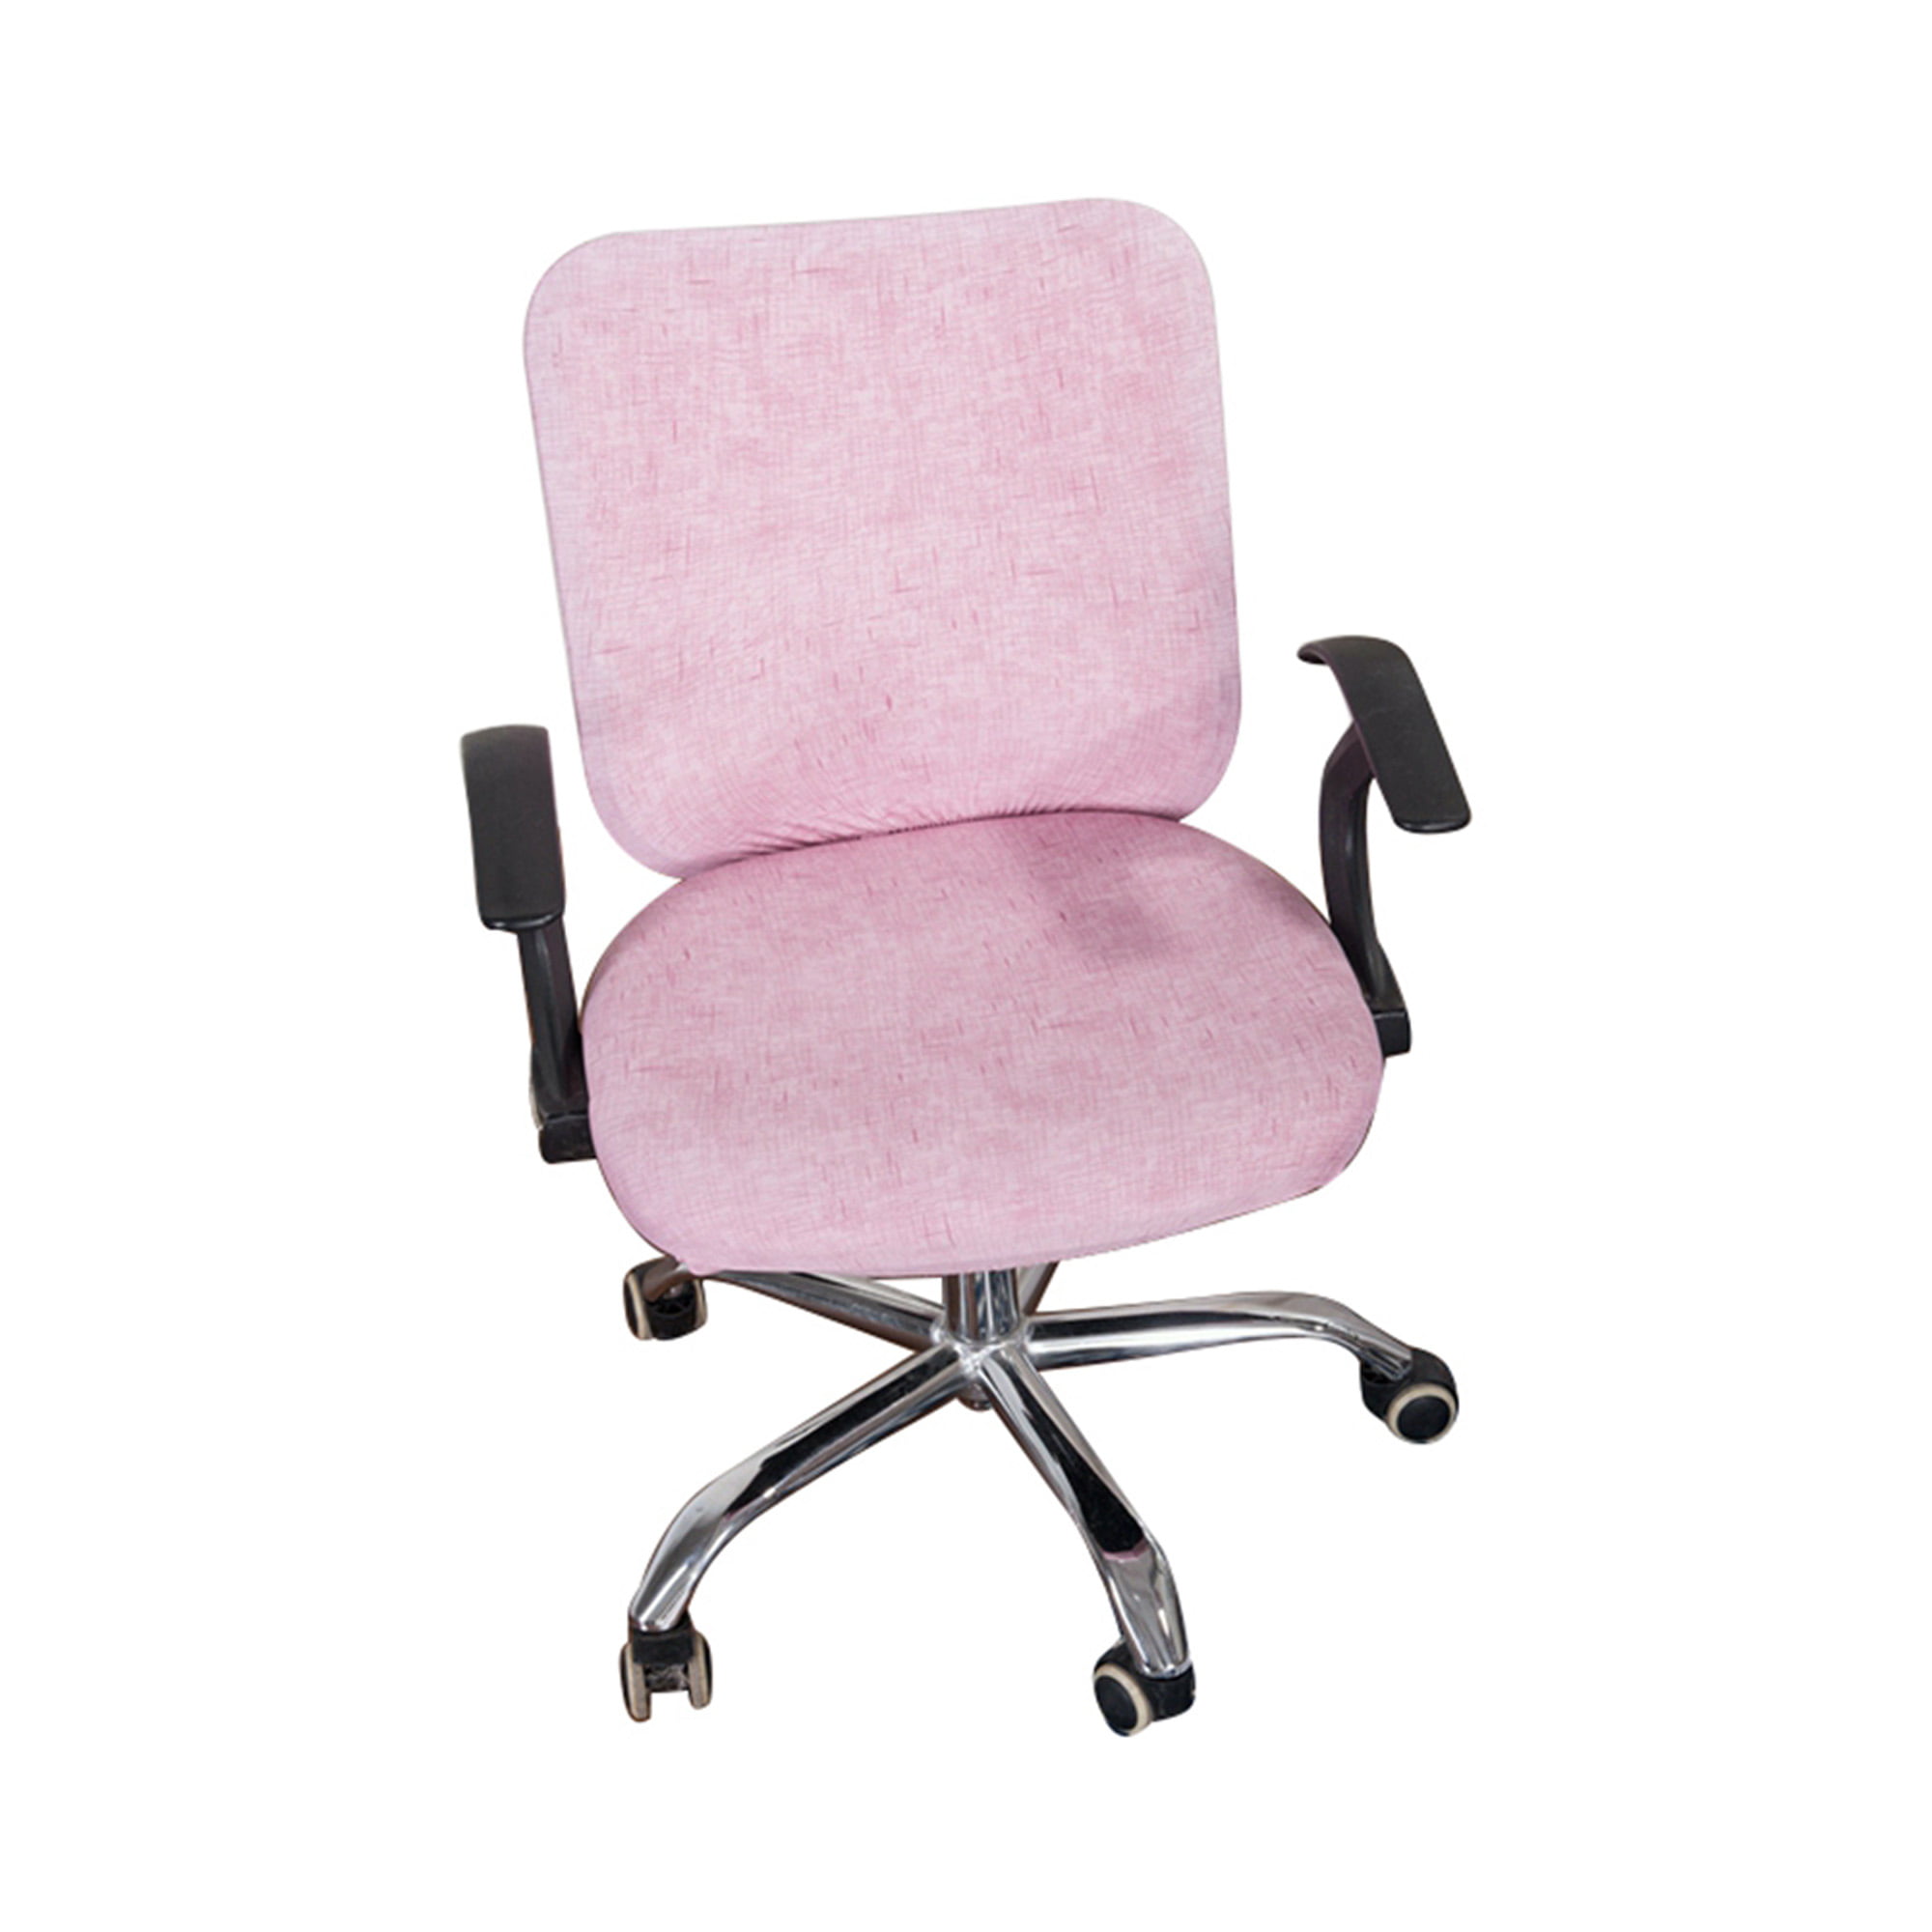 Computer Office Chair Covers Protective & Stretchable Design Chair Cover 